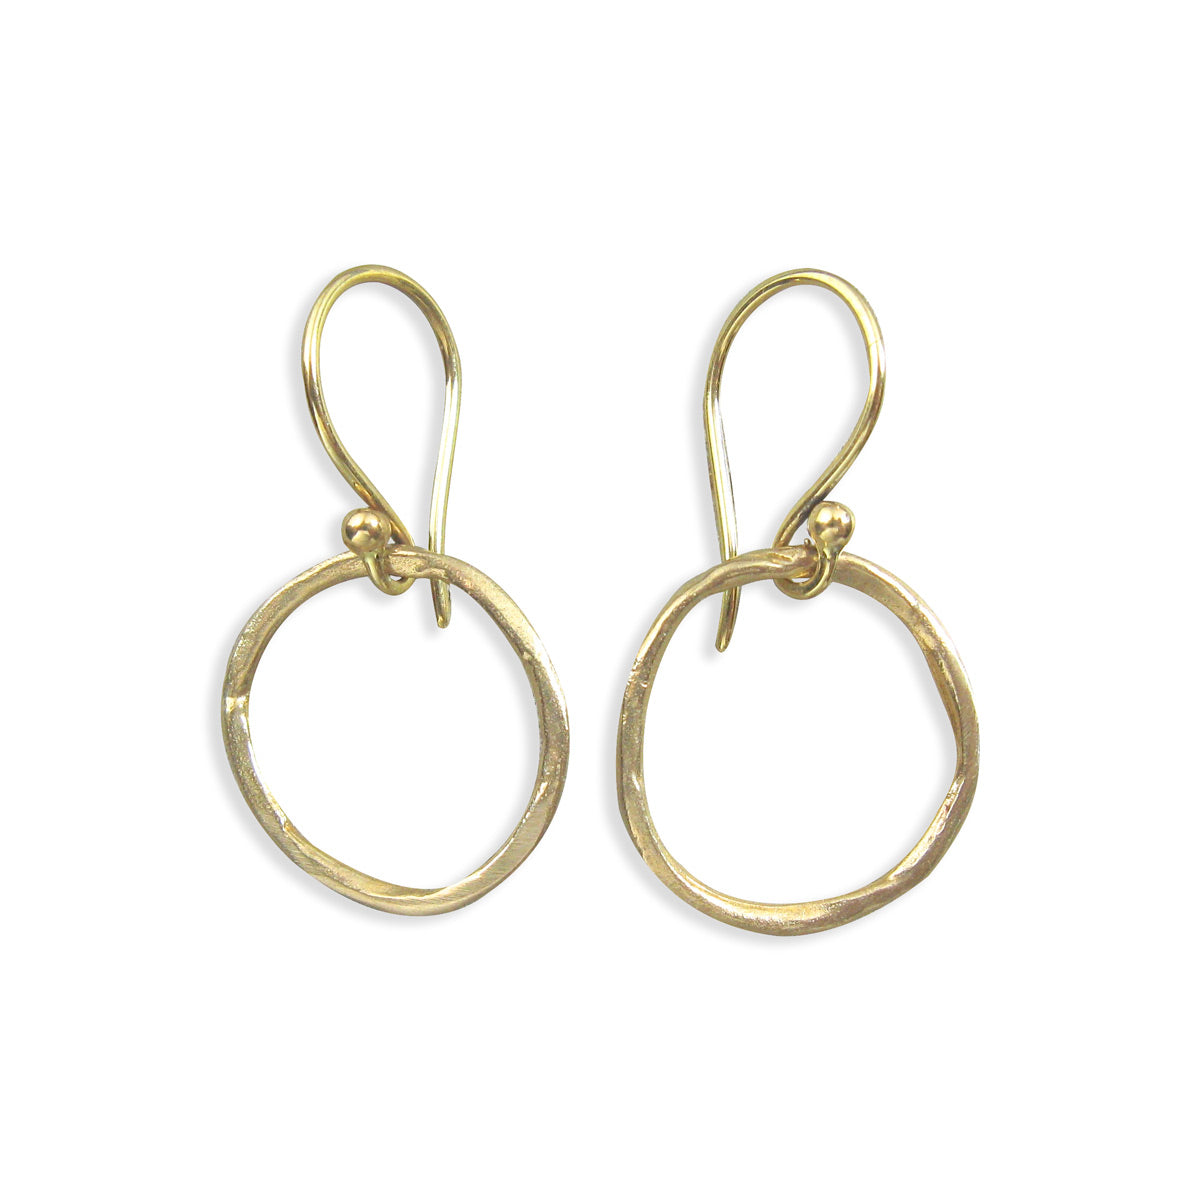 artisan-earring-bronze-oxidized-silver-round-hoop-small